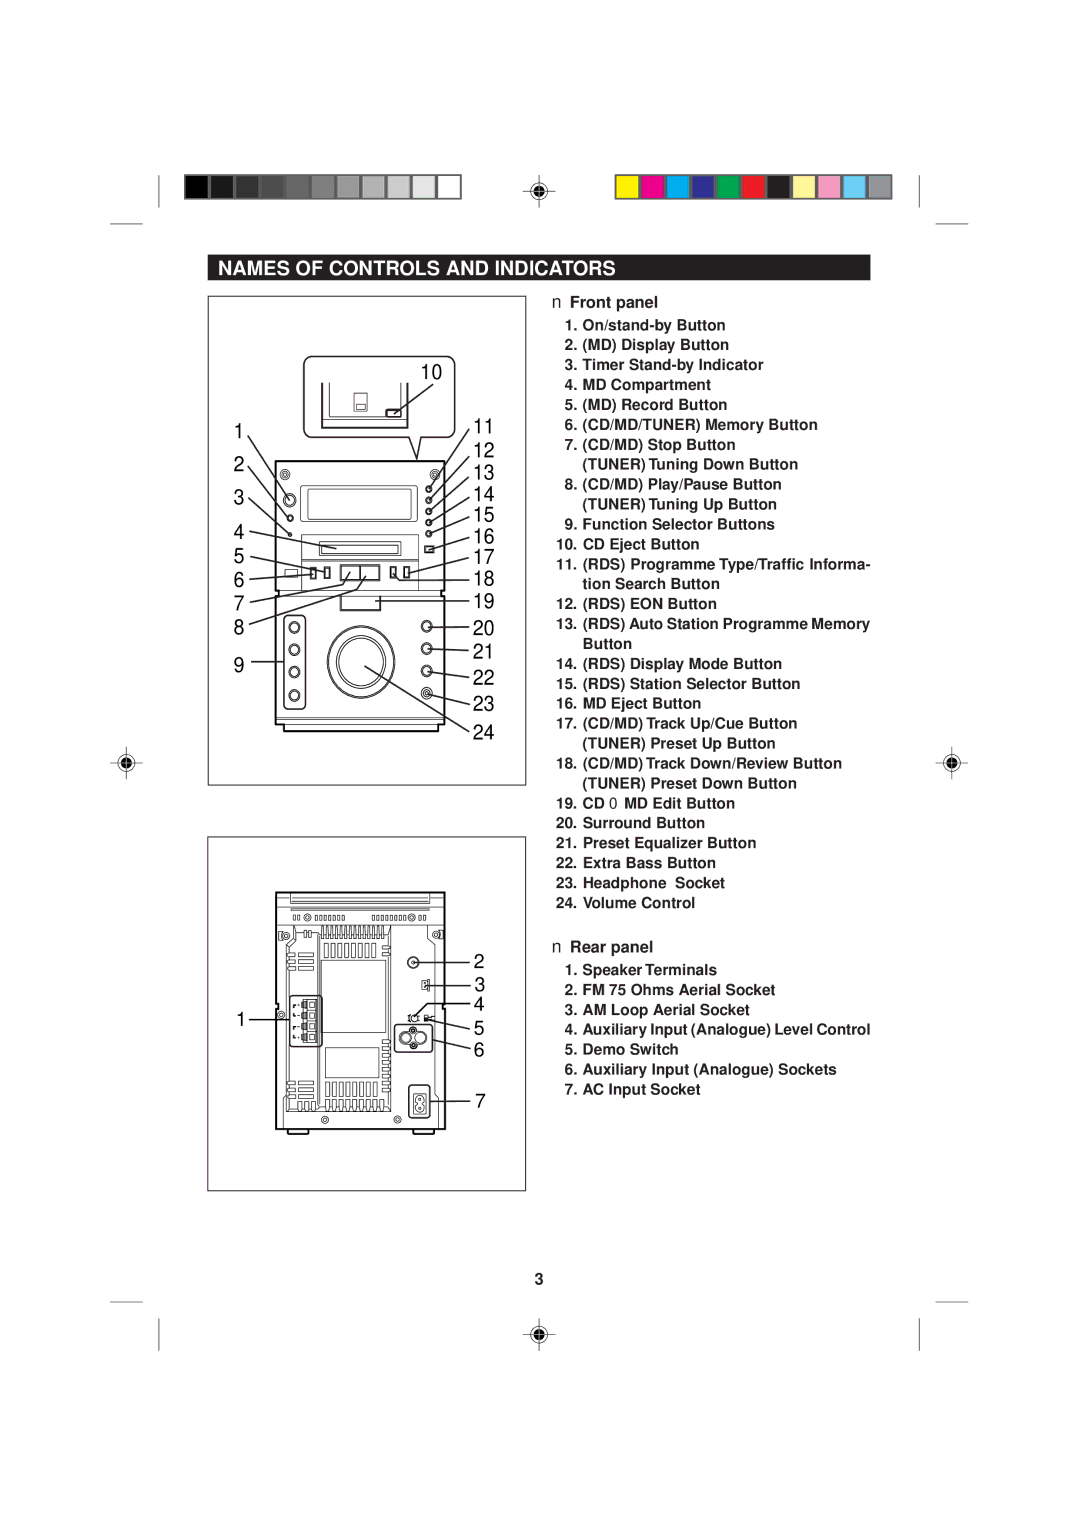 Sharp MD-M2H operation manual Names of Controls and Indicators, Front panel, Rear panel 